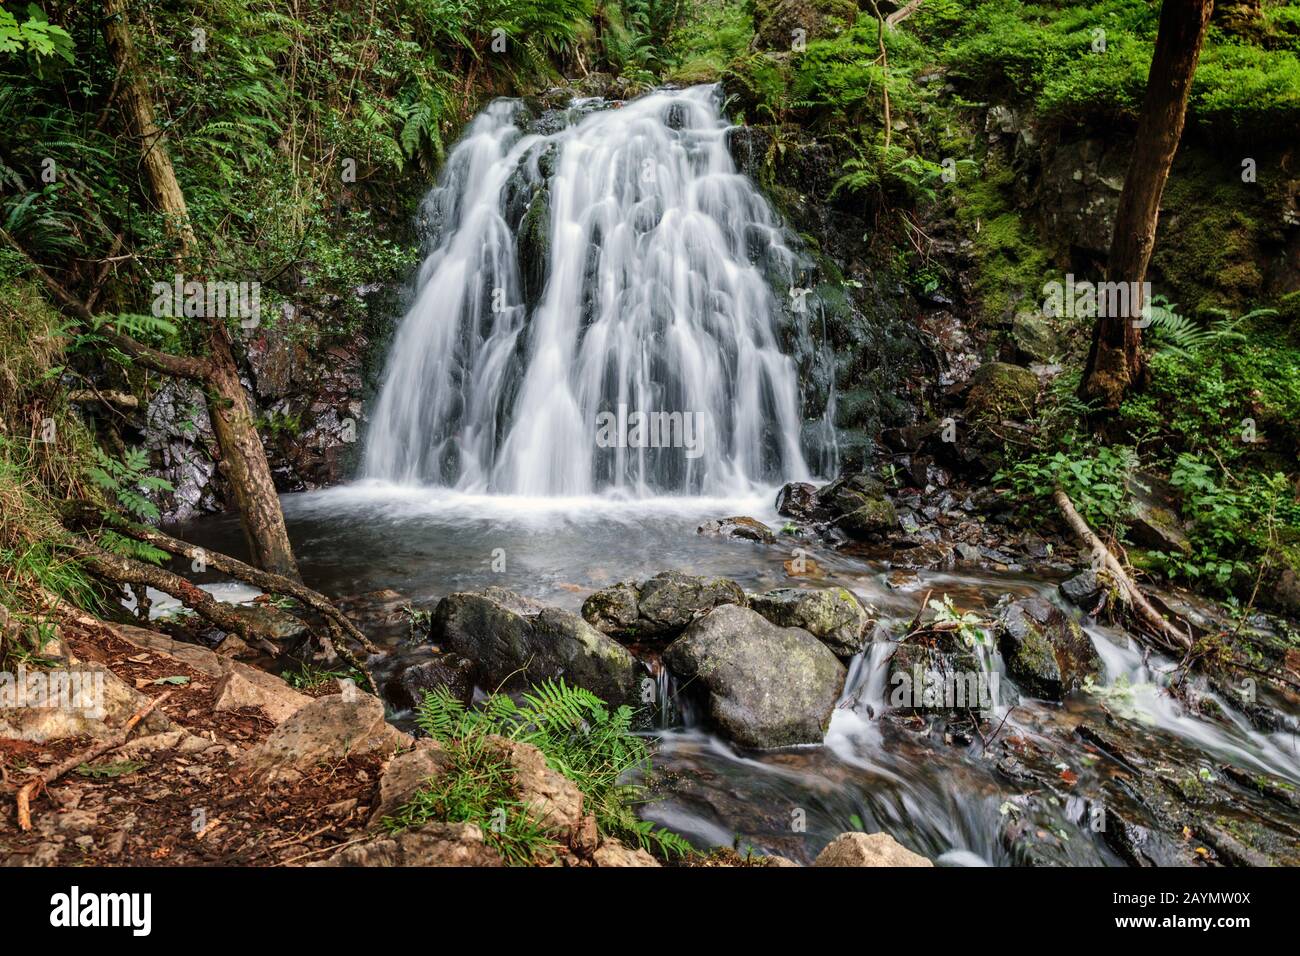 Tom Gill waterfall lies below the picturesque Tarn Hows beauty spot, Lake District, Cumbria, England, Uk Stock Photo